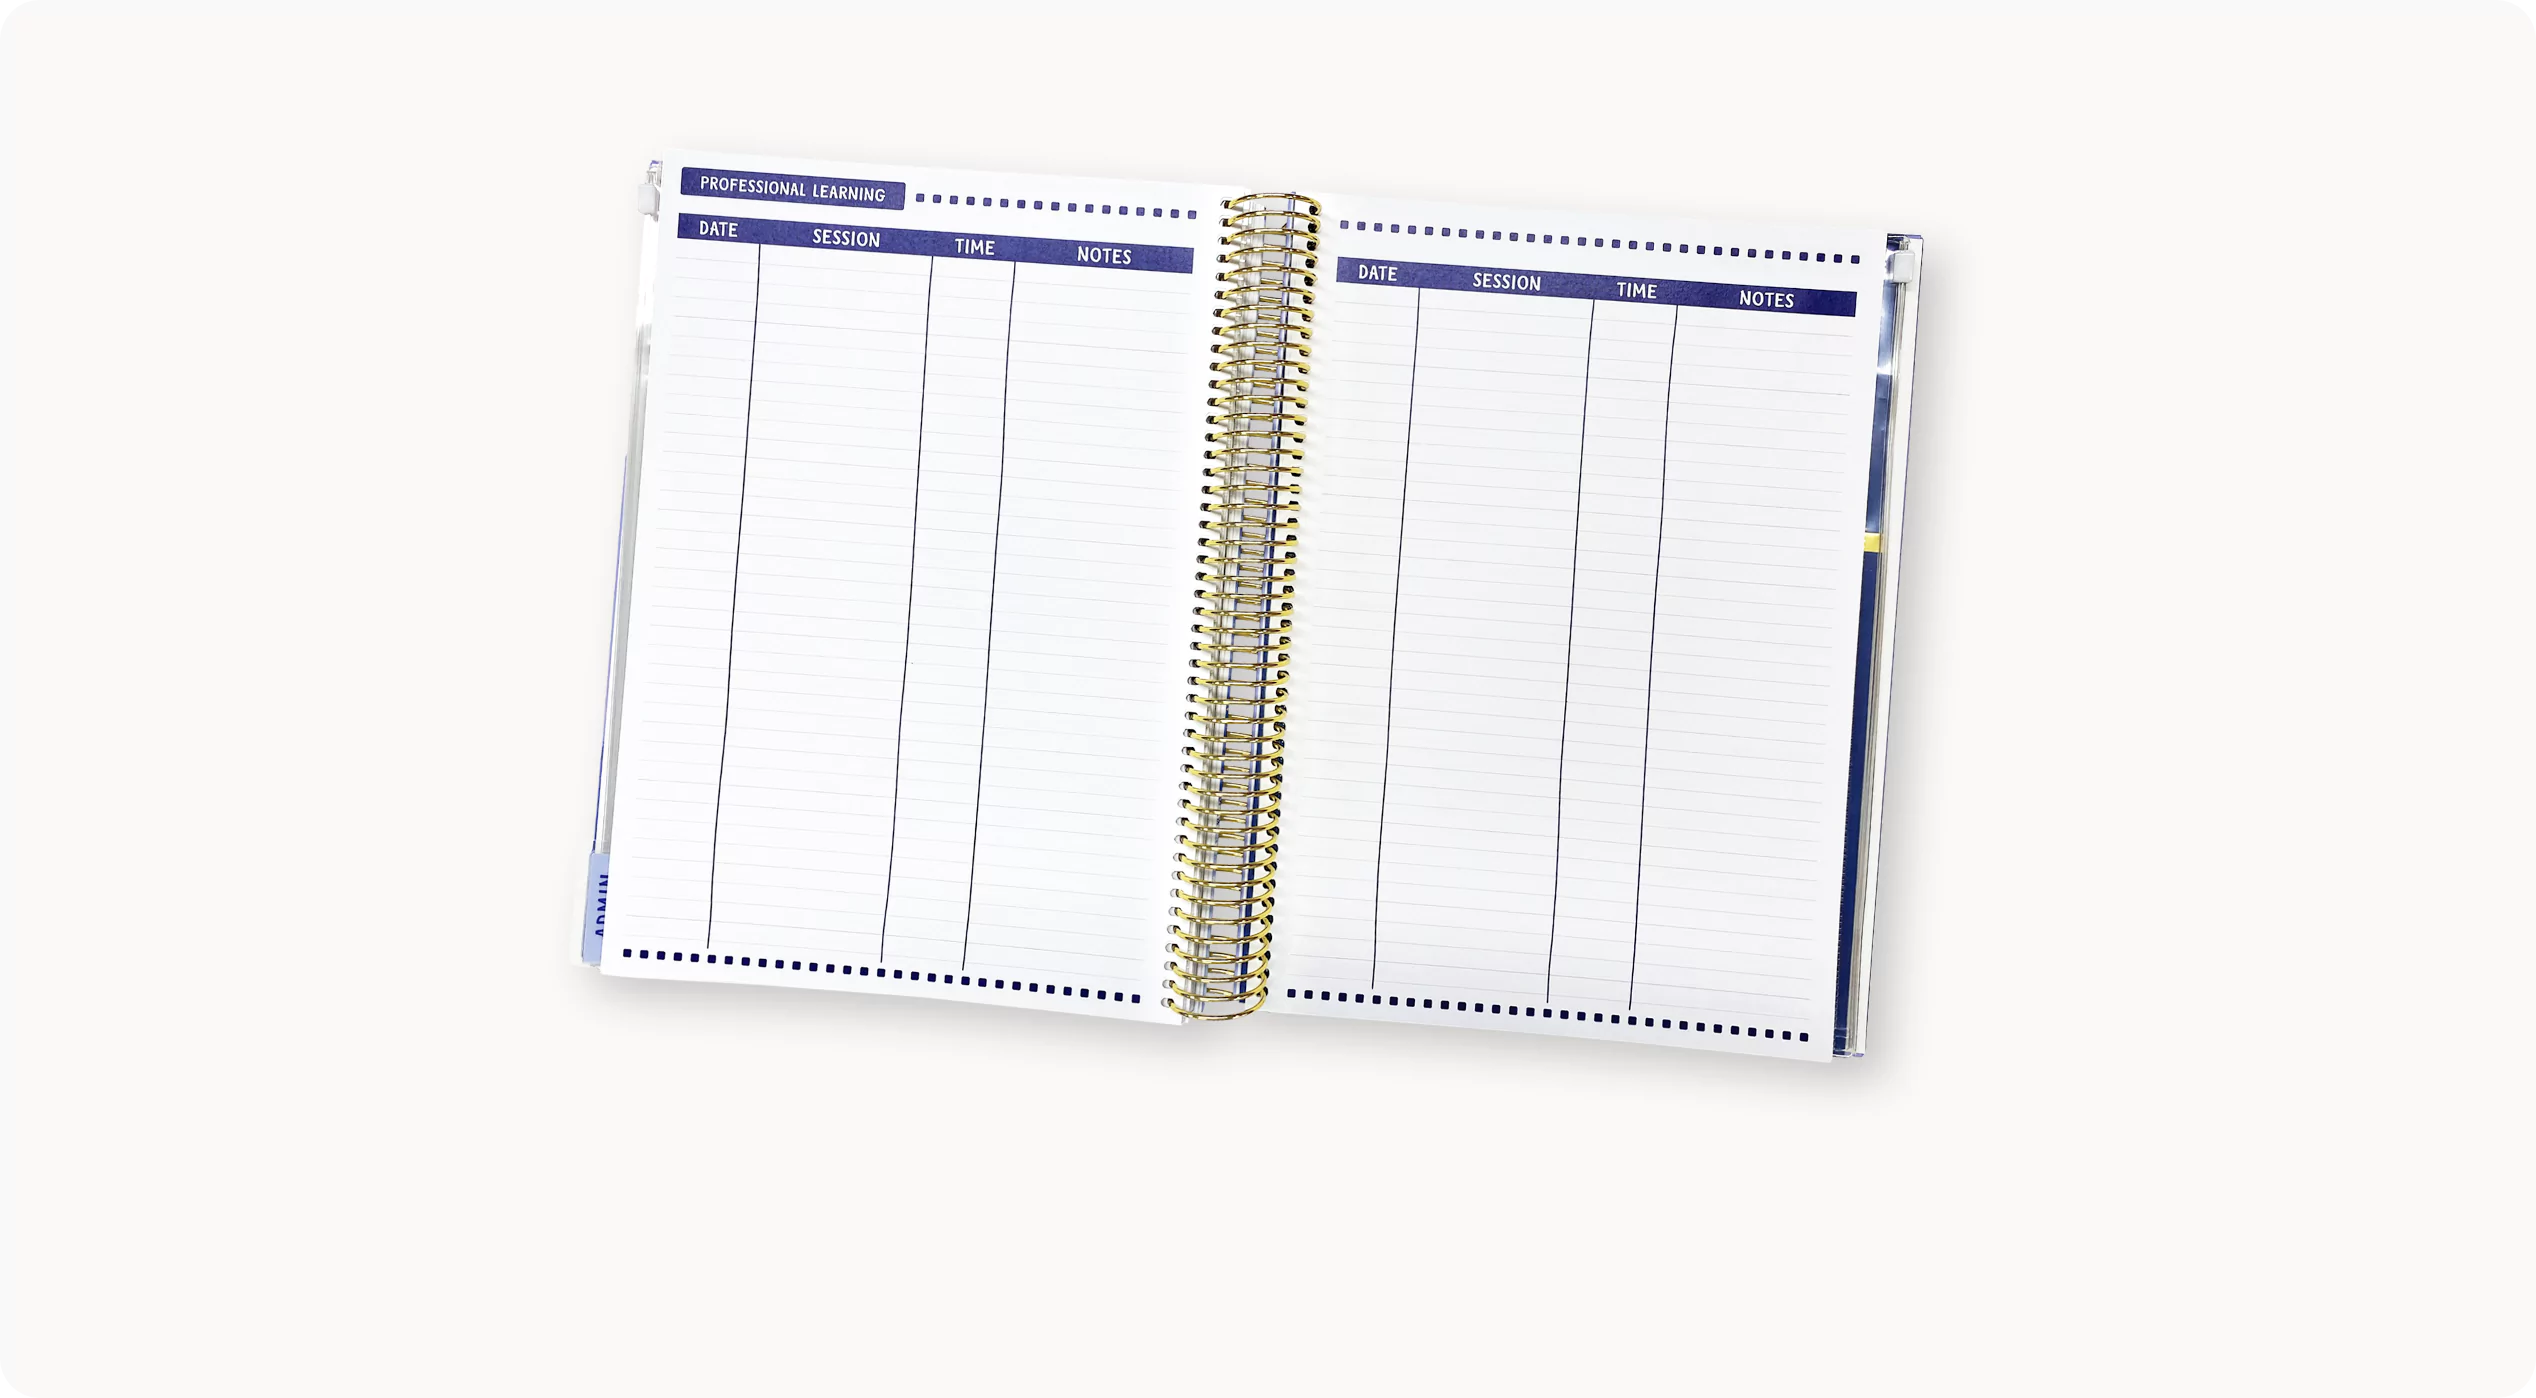 08/10 - Keep track of your professional learning in style!